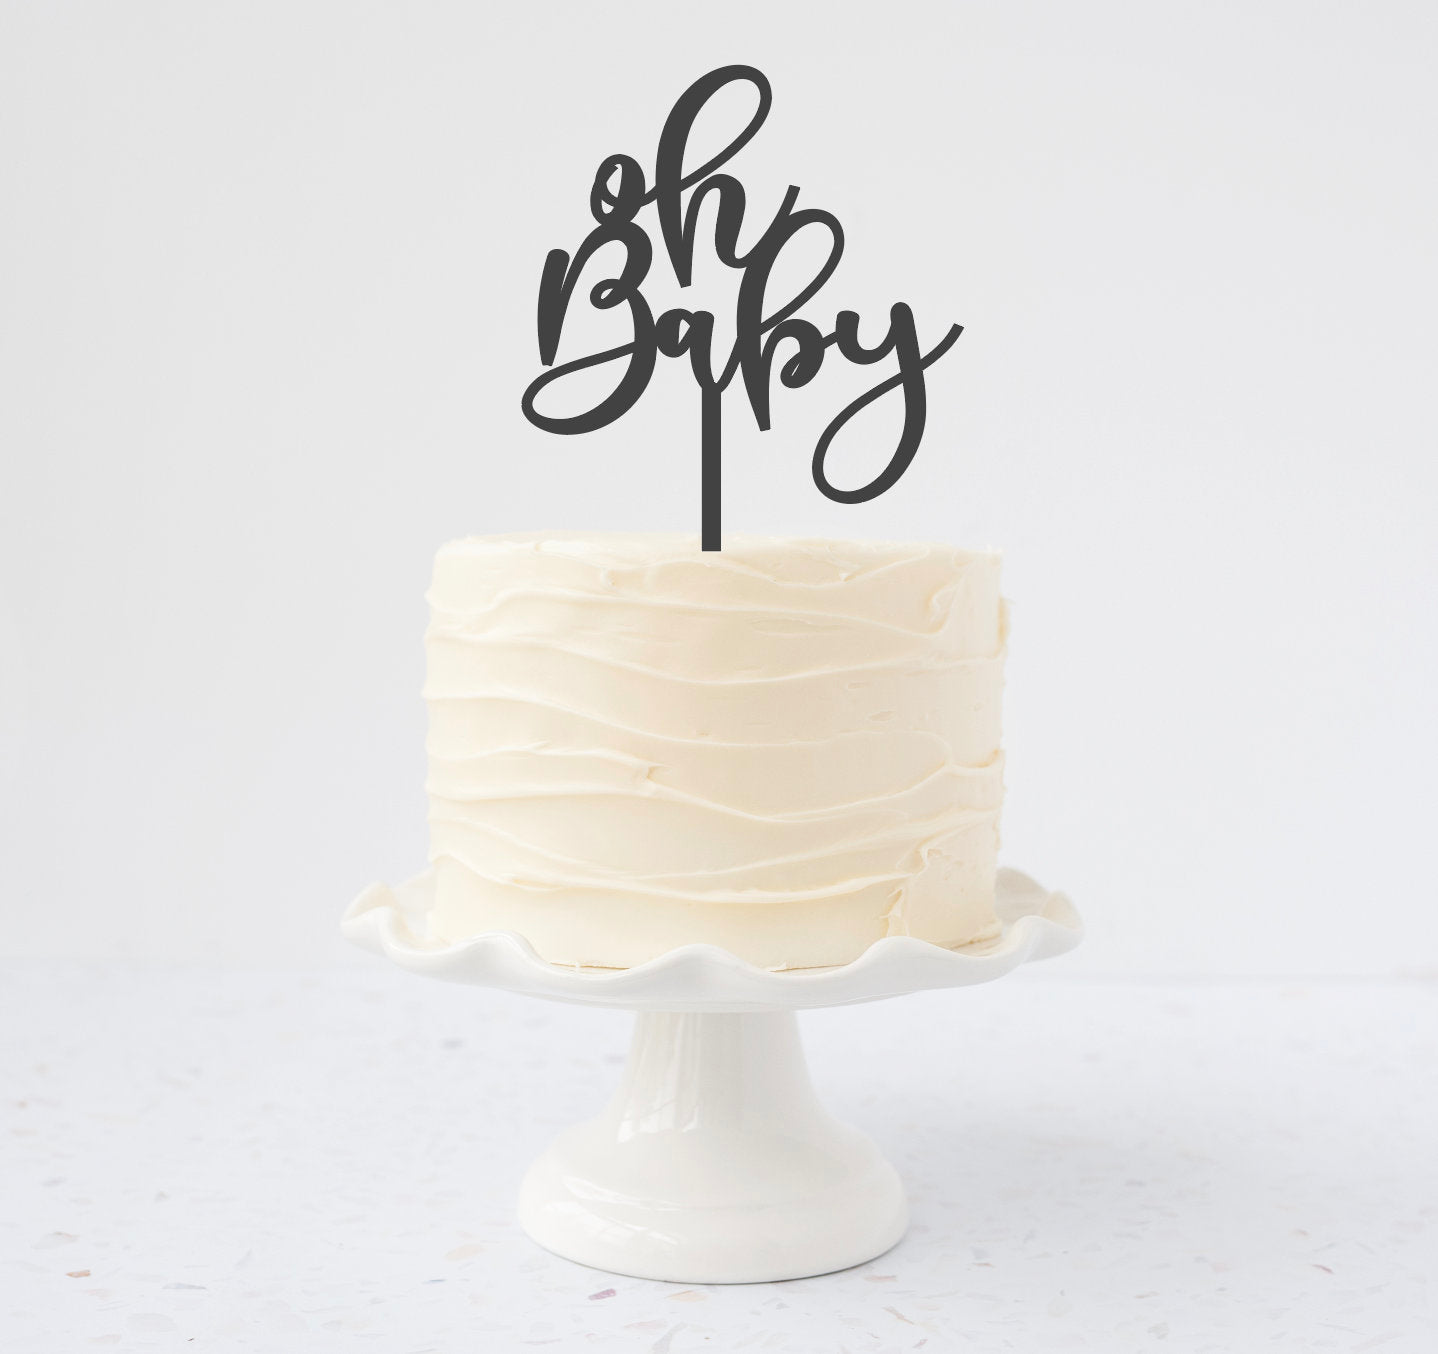 Cake topper for babyshower, Personalized cake topper, Rustic wood wedding cake topper, Custom birthday oh baby